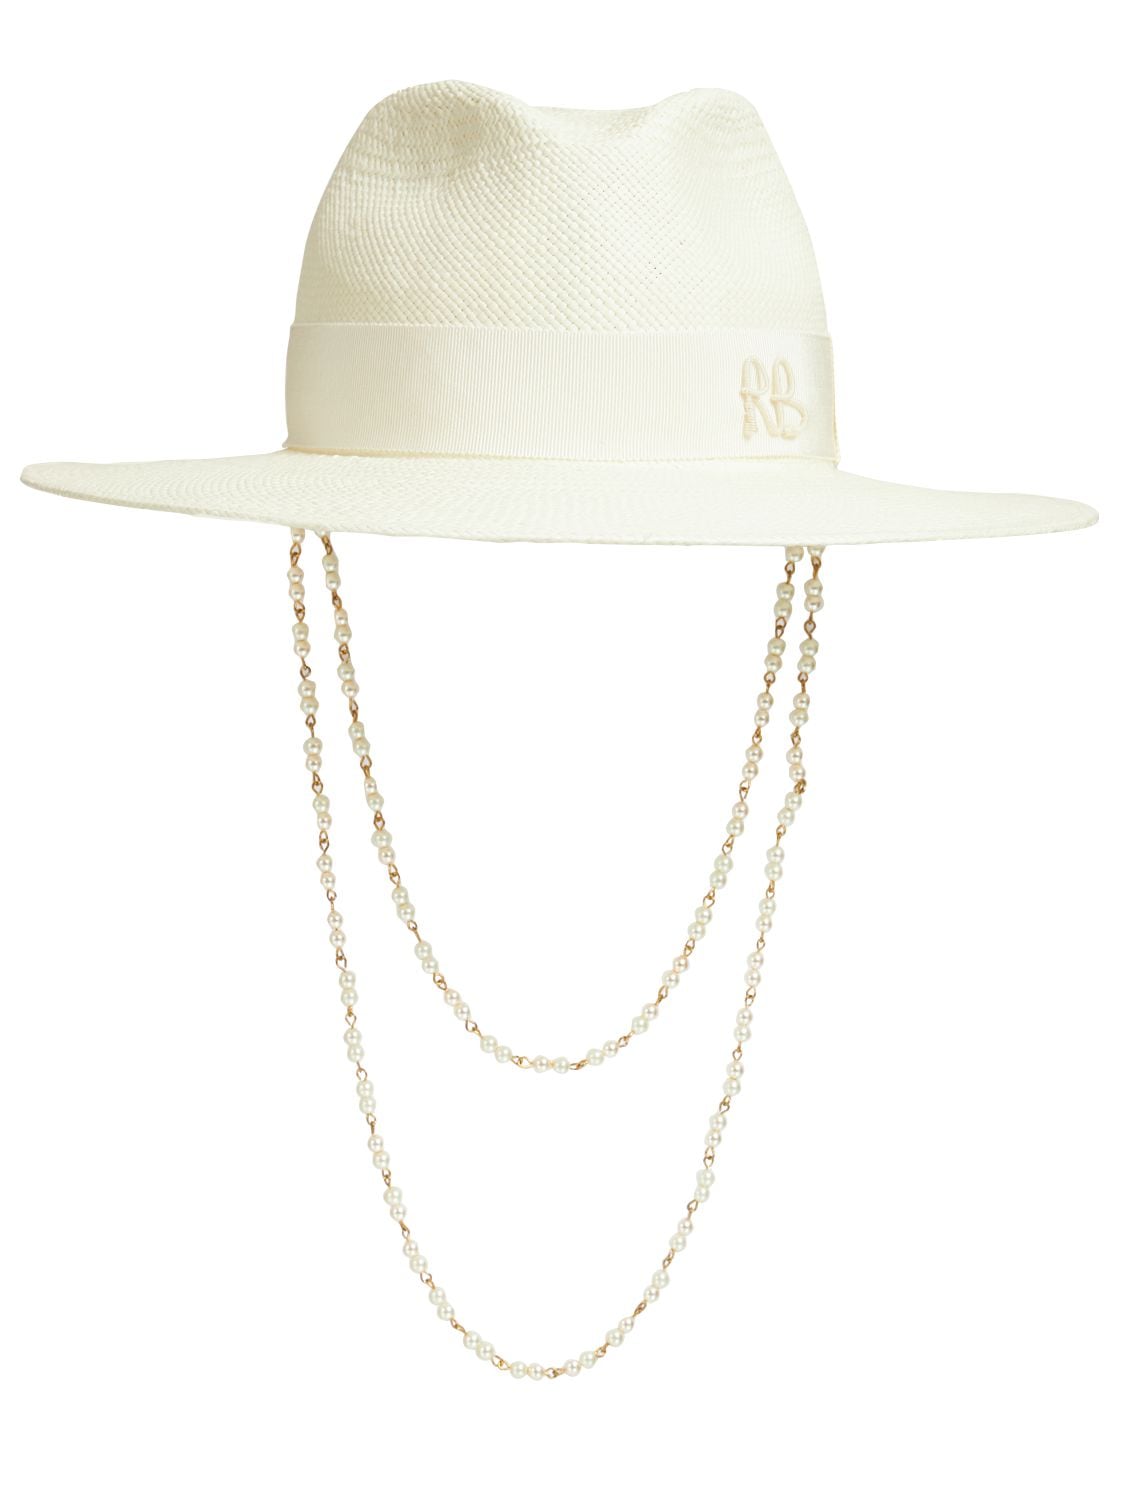 Image of Straw Boater Hat W/ Chin Straps